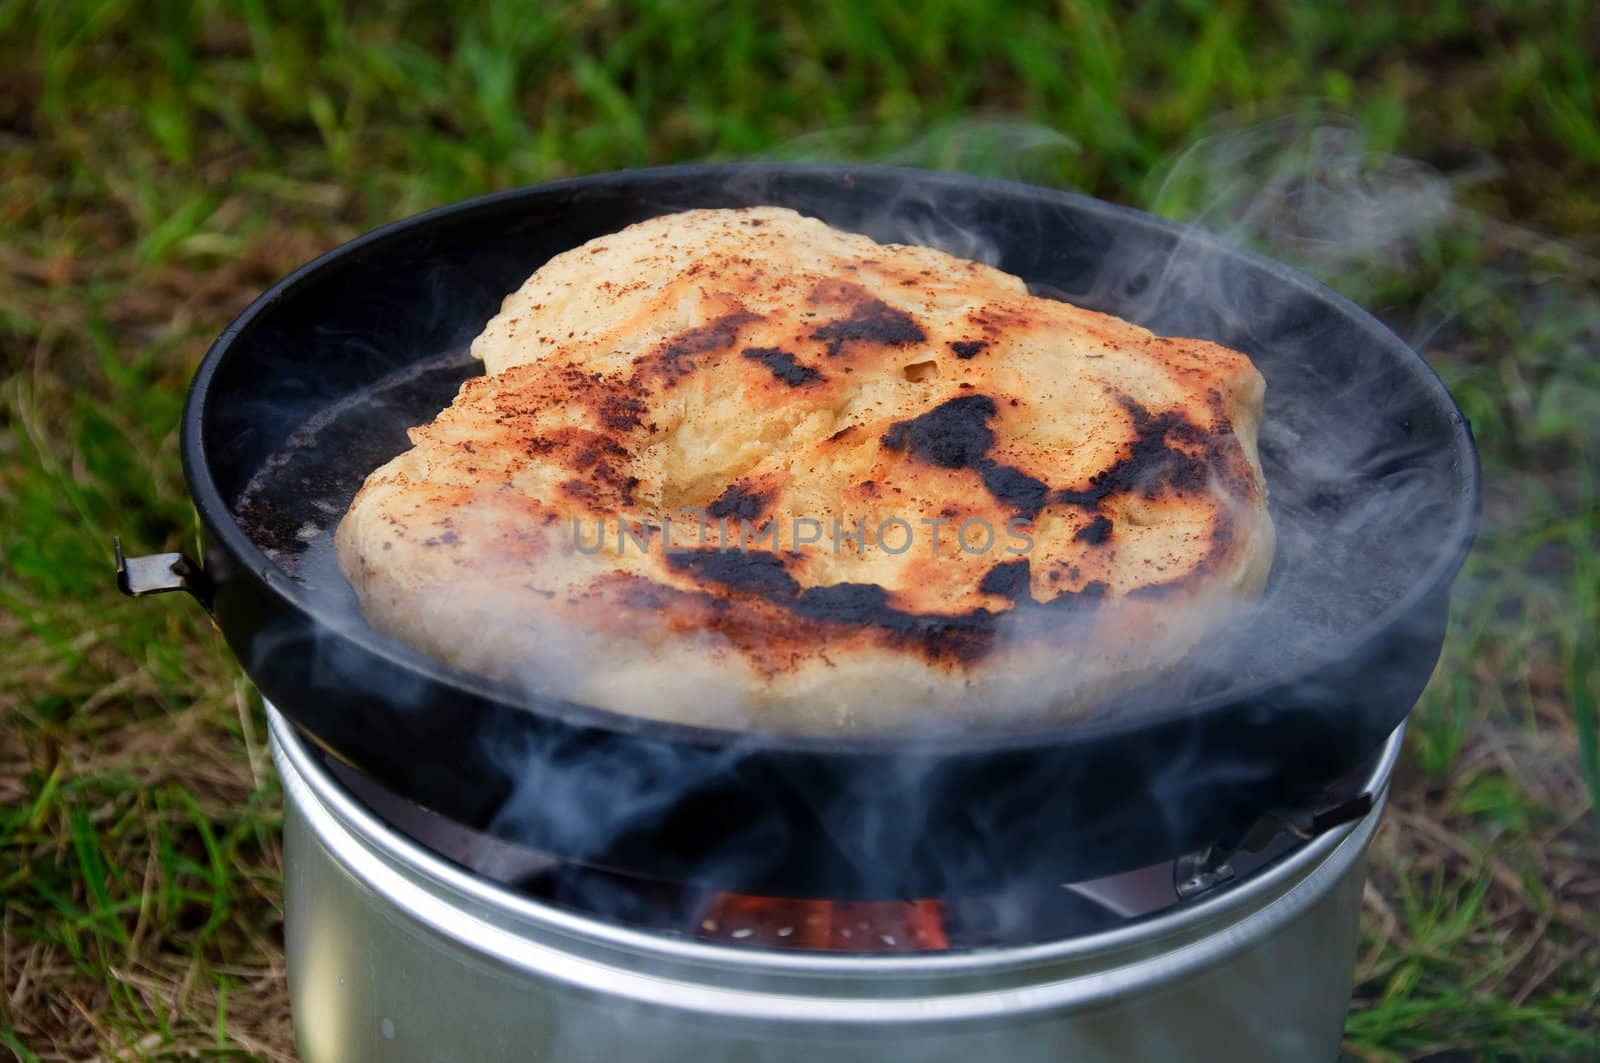 Baking bread outdoor on a camping stove